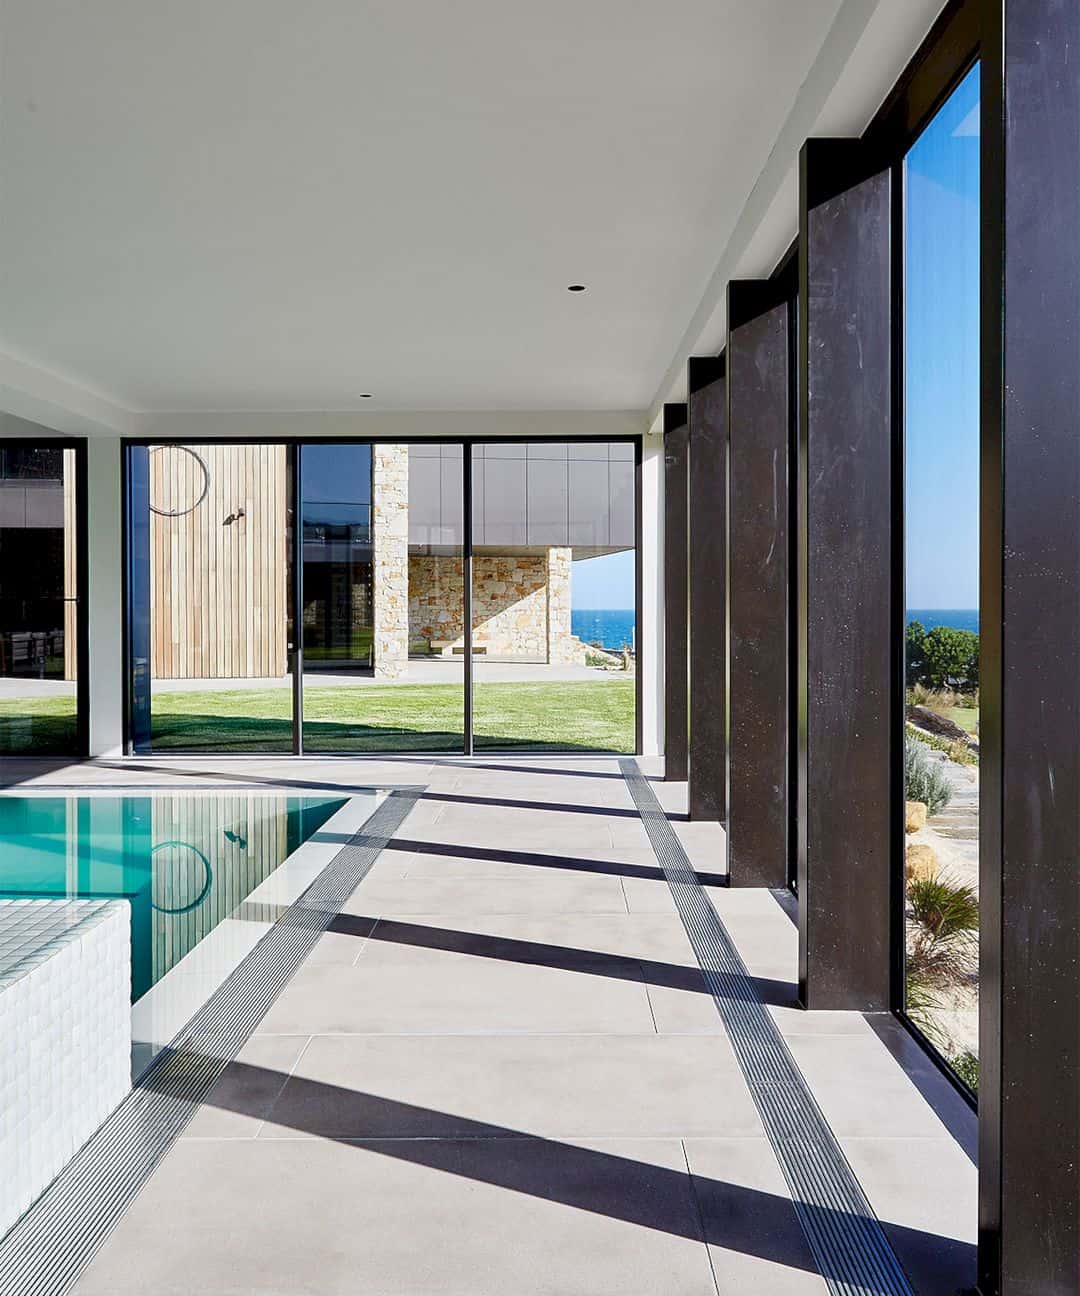 Ocean Residence A Beach House That Merges An Interior And Exterior Surrounding Landscape 1